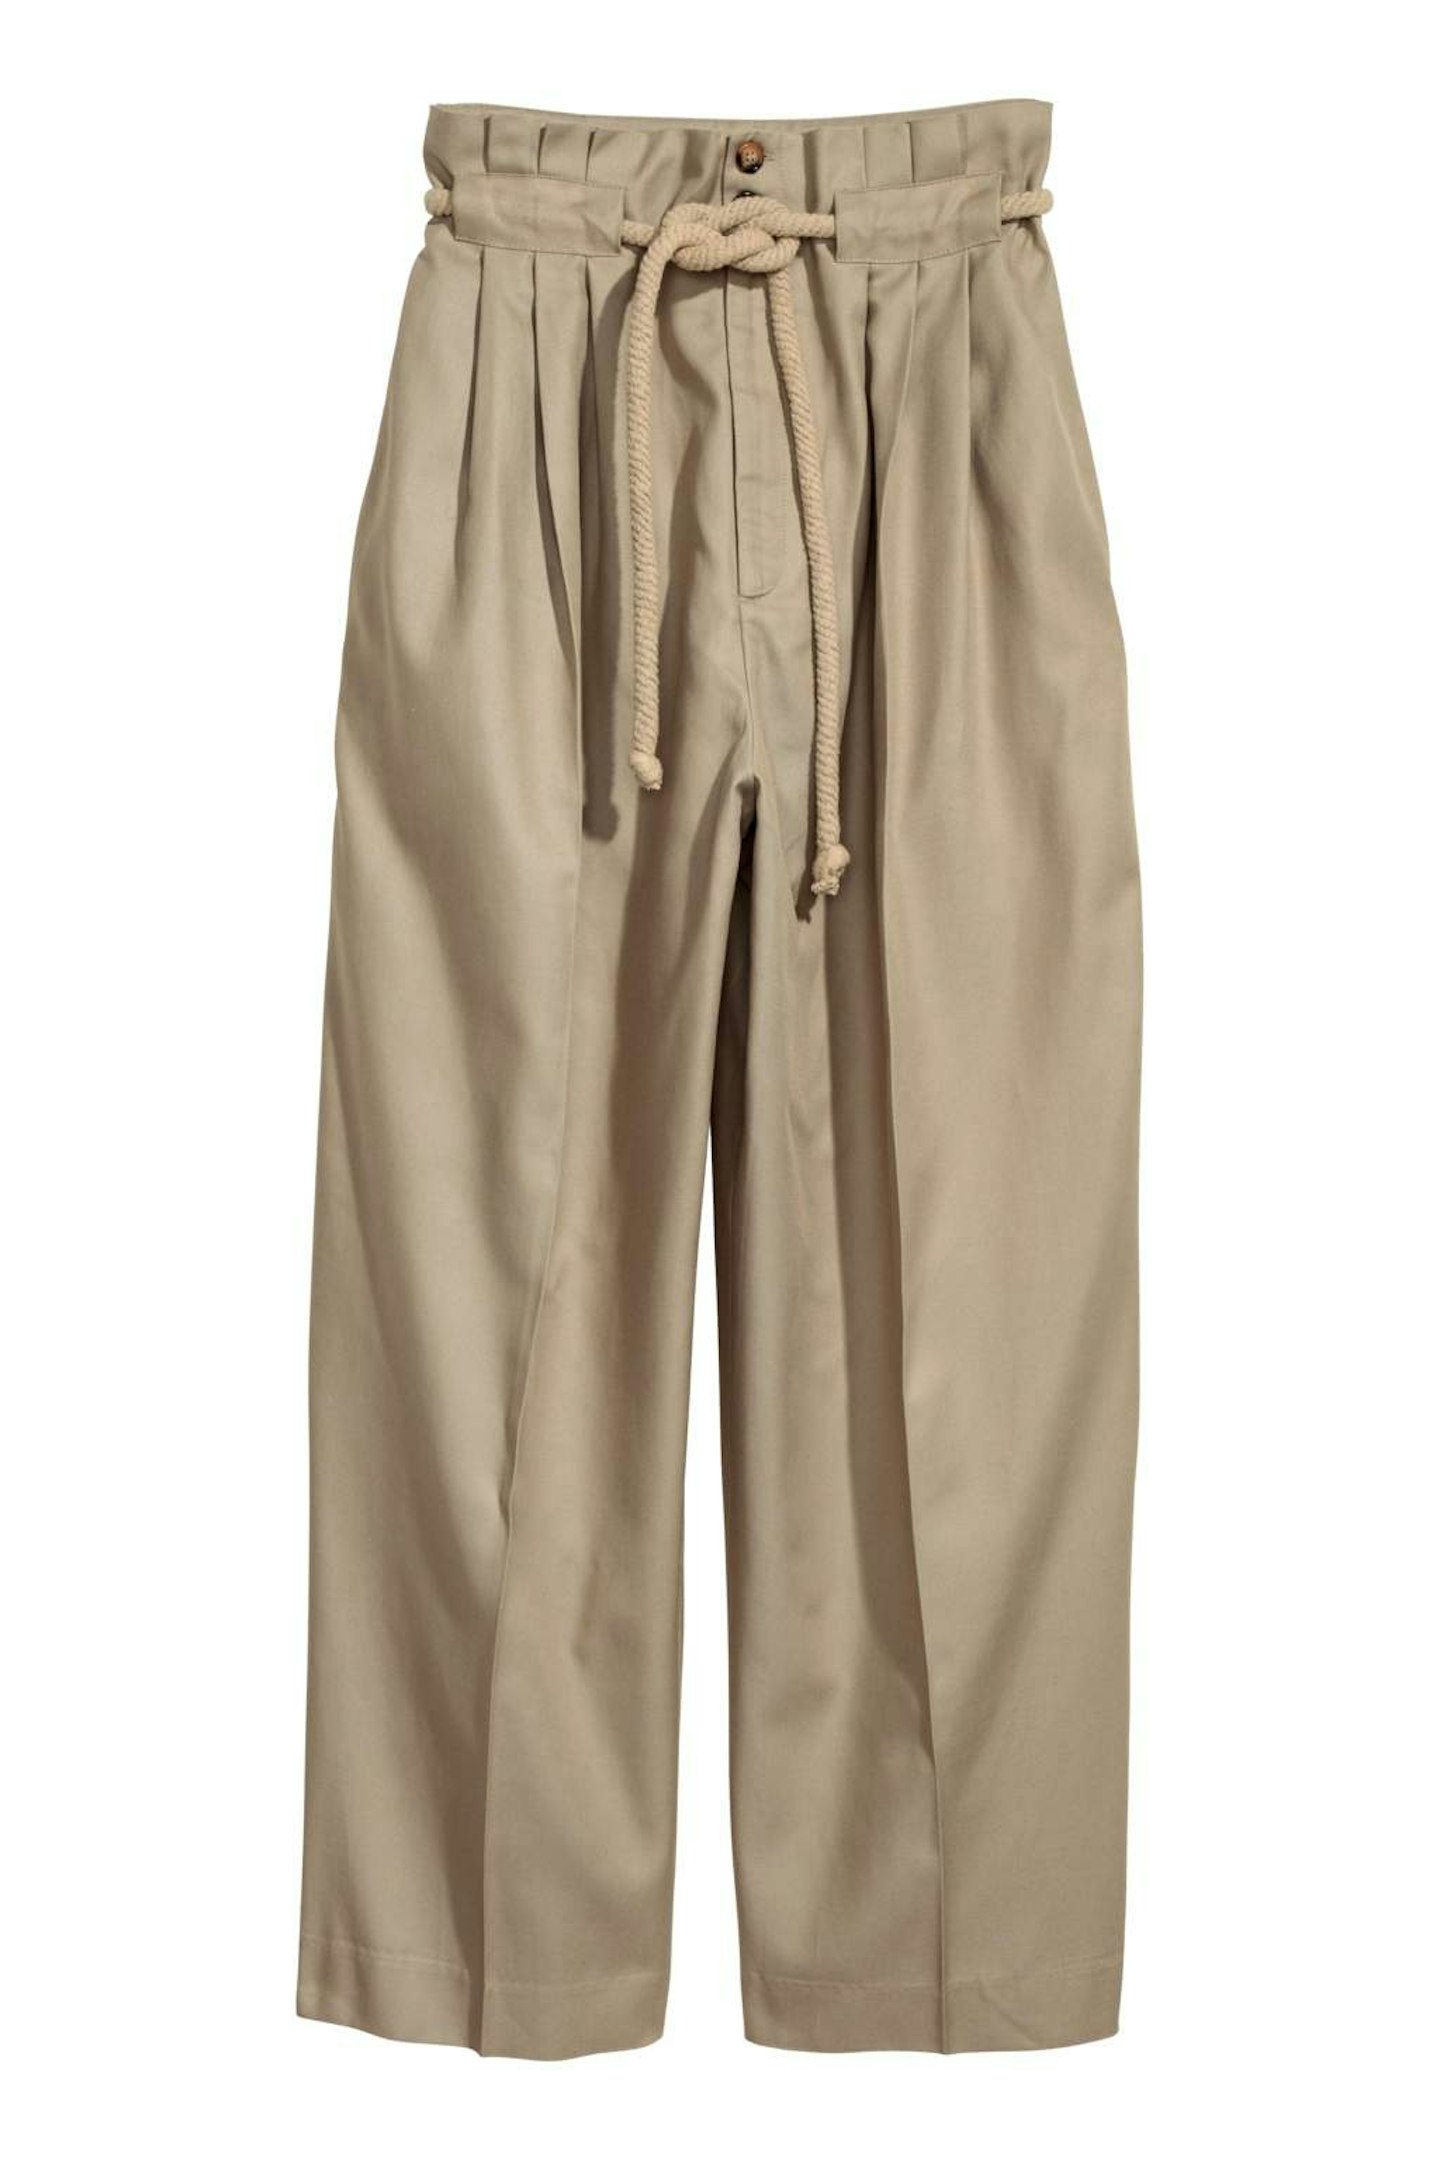 H&M-trousers